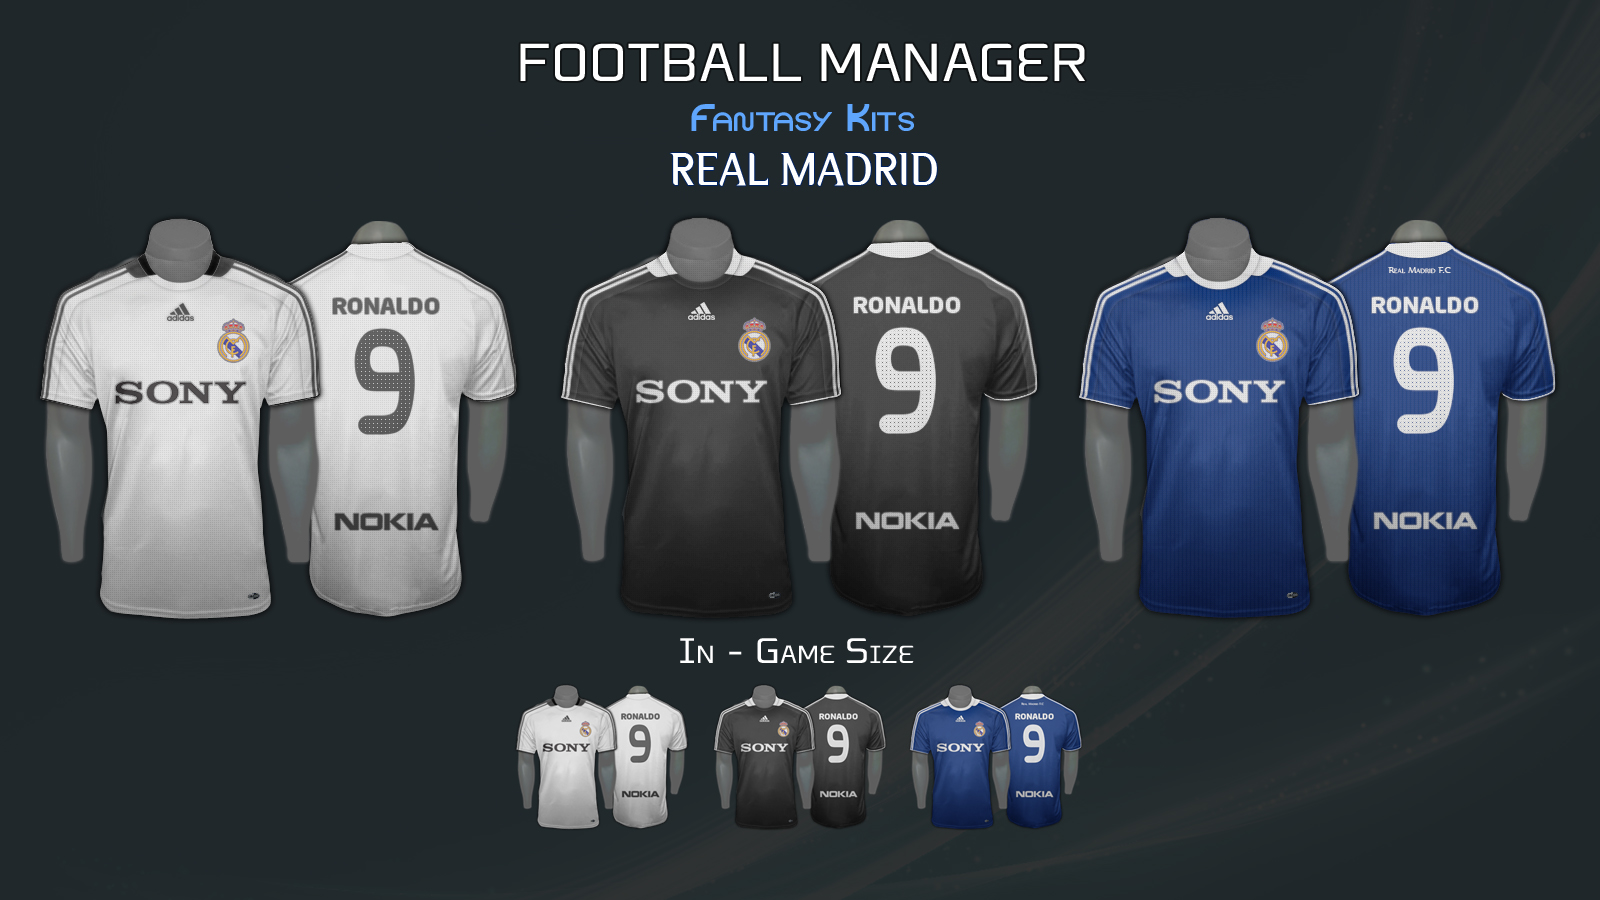 Download this Real Madrid Shop picture